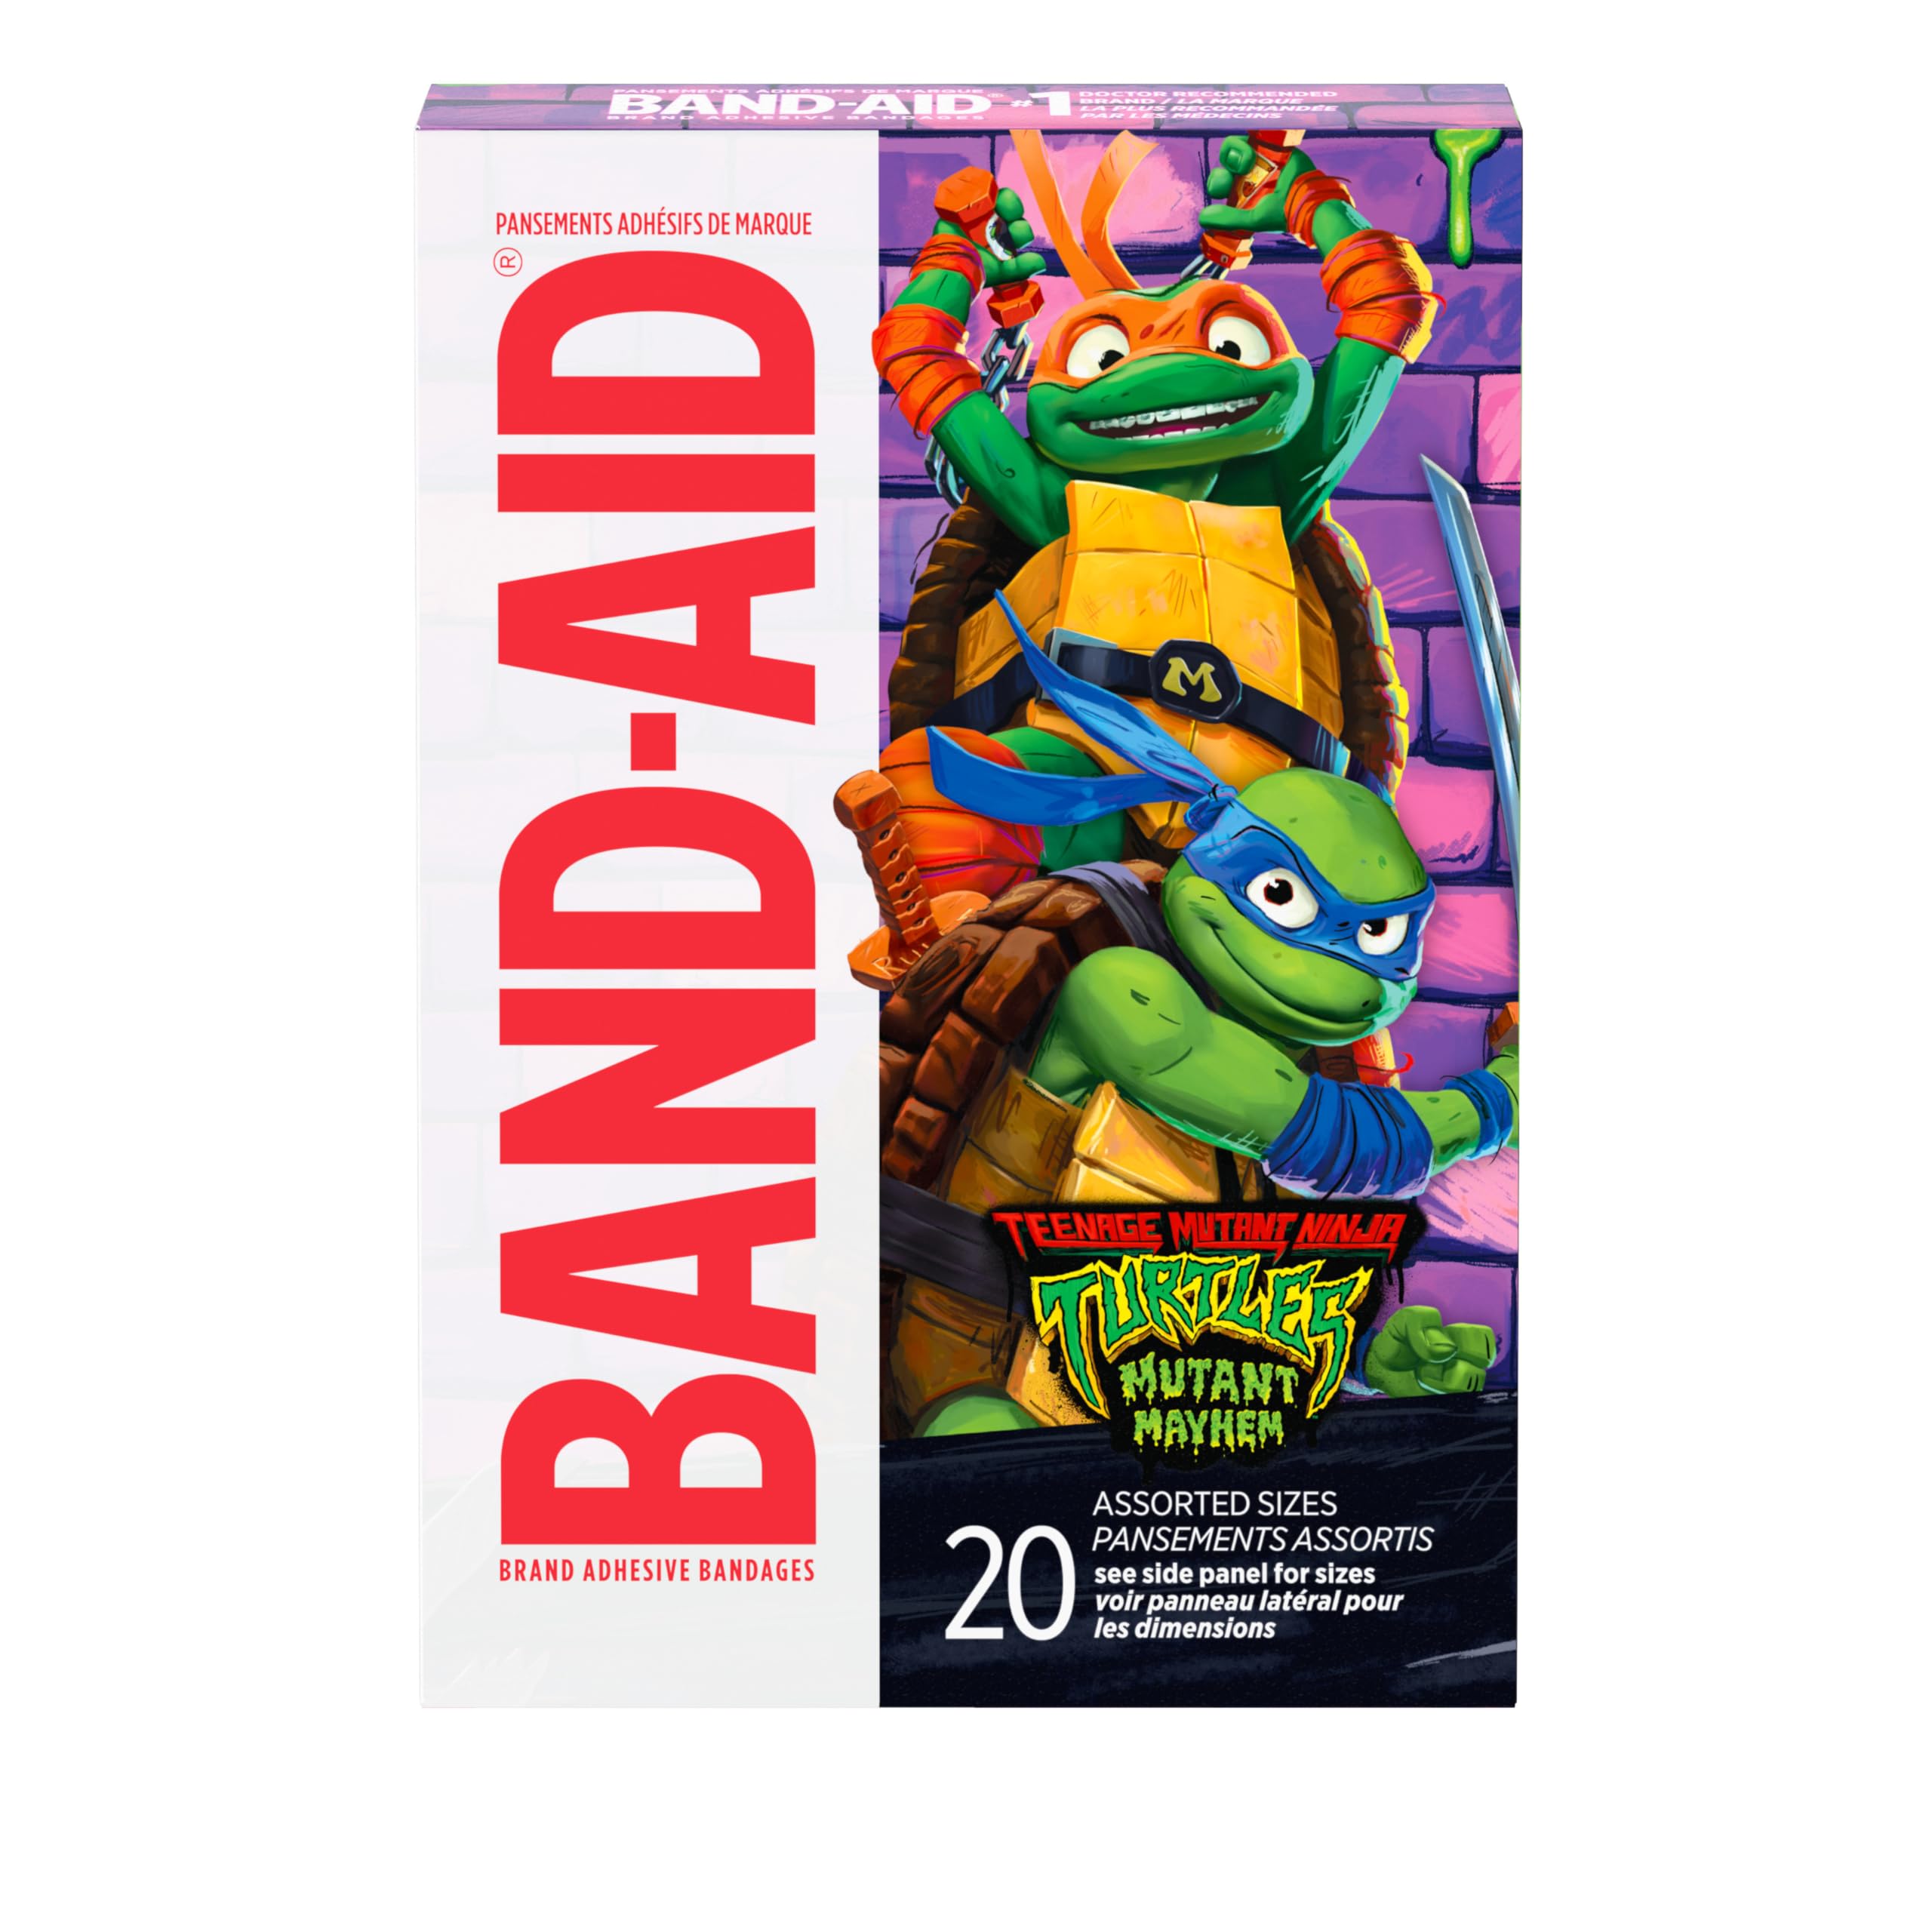 Band-Aid Brand Adhesive First Aid Bandages for Minor Cuts & Scrapes, Wound Care Featuring Nickelodeon TMNT Characters, Fun Bandages for Kids & Toddlers, Sterile, Assorted Sizes, 20 Ct